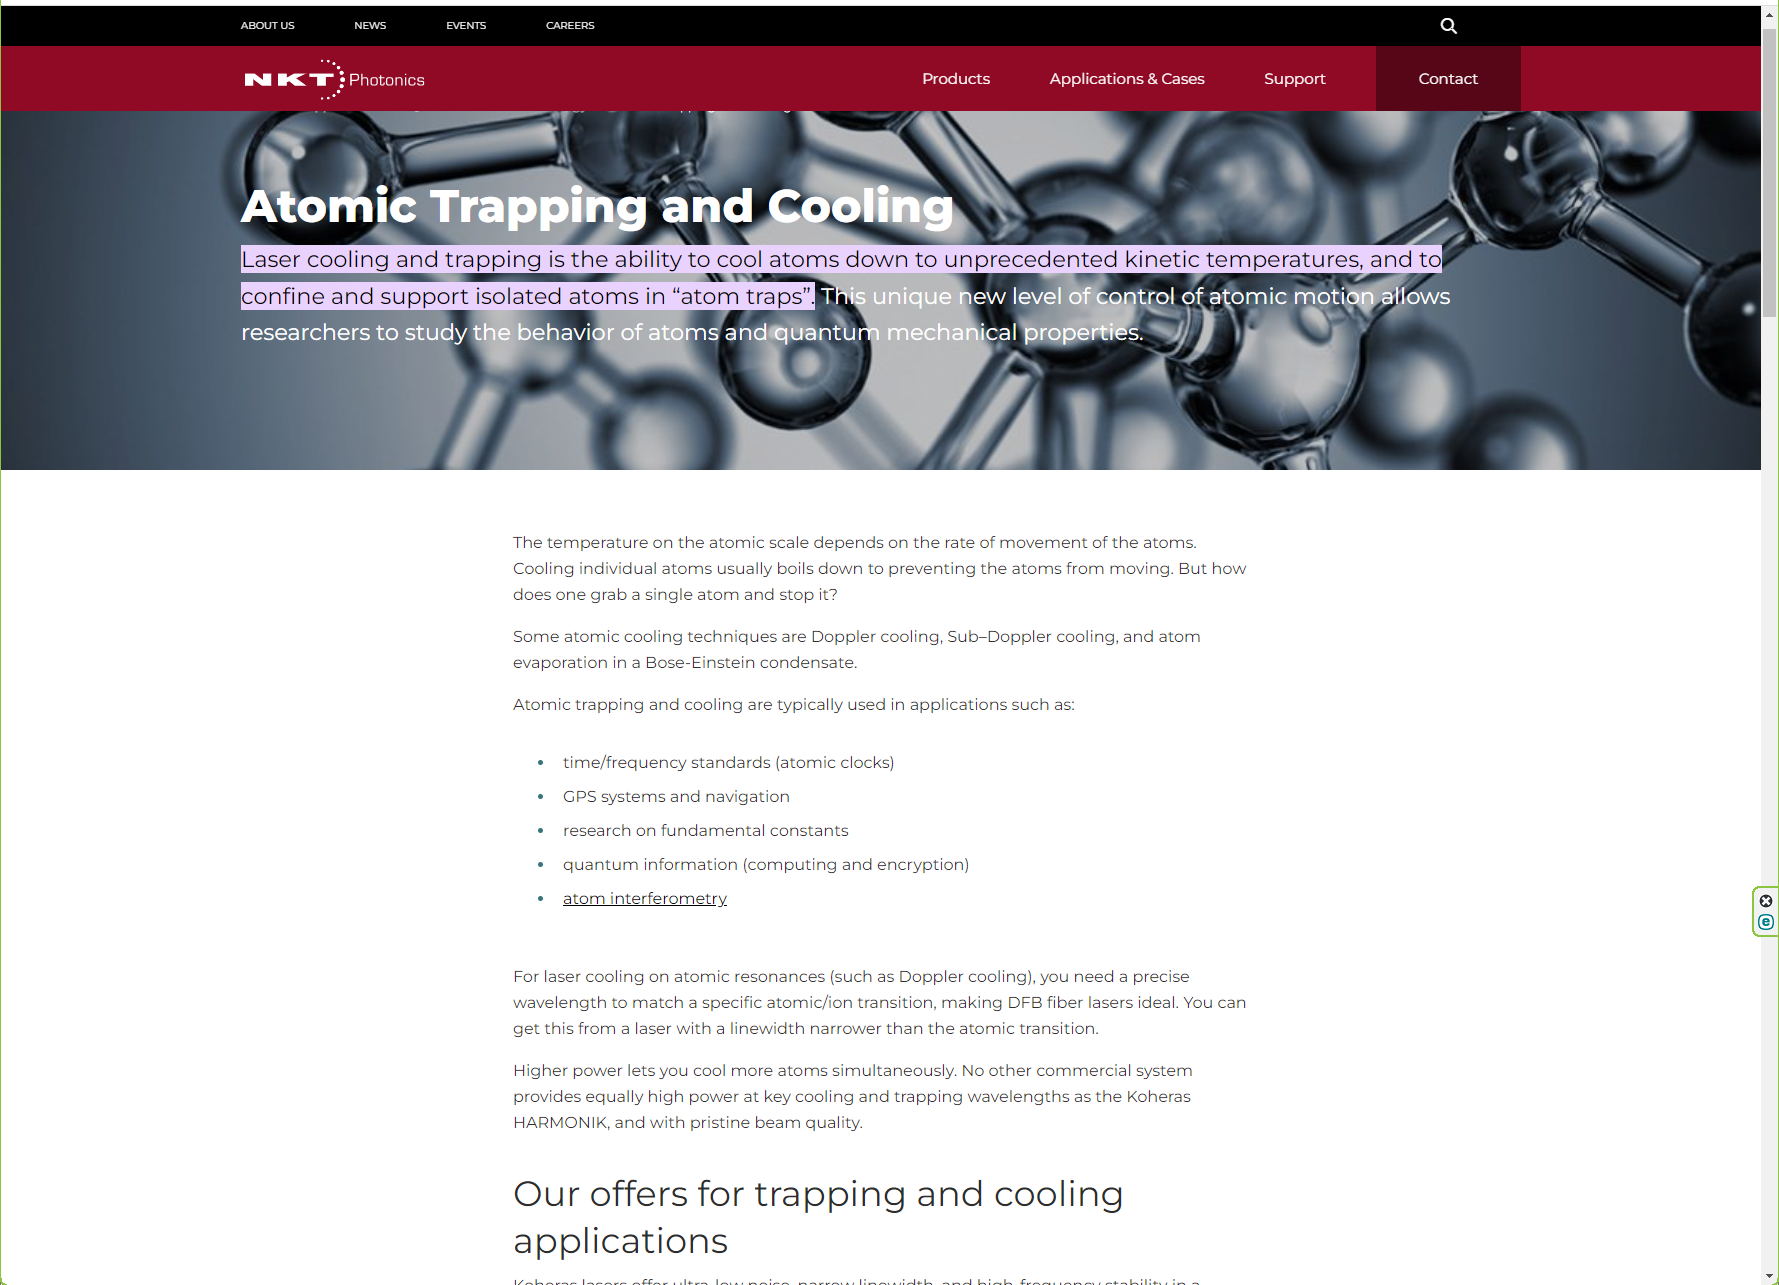 Atomic Trapping and Cooling